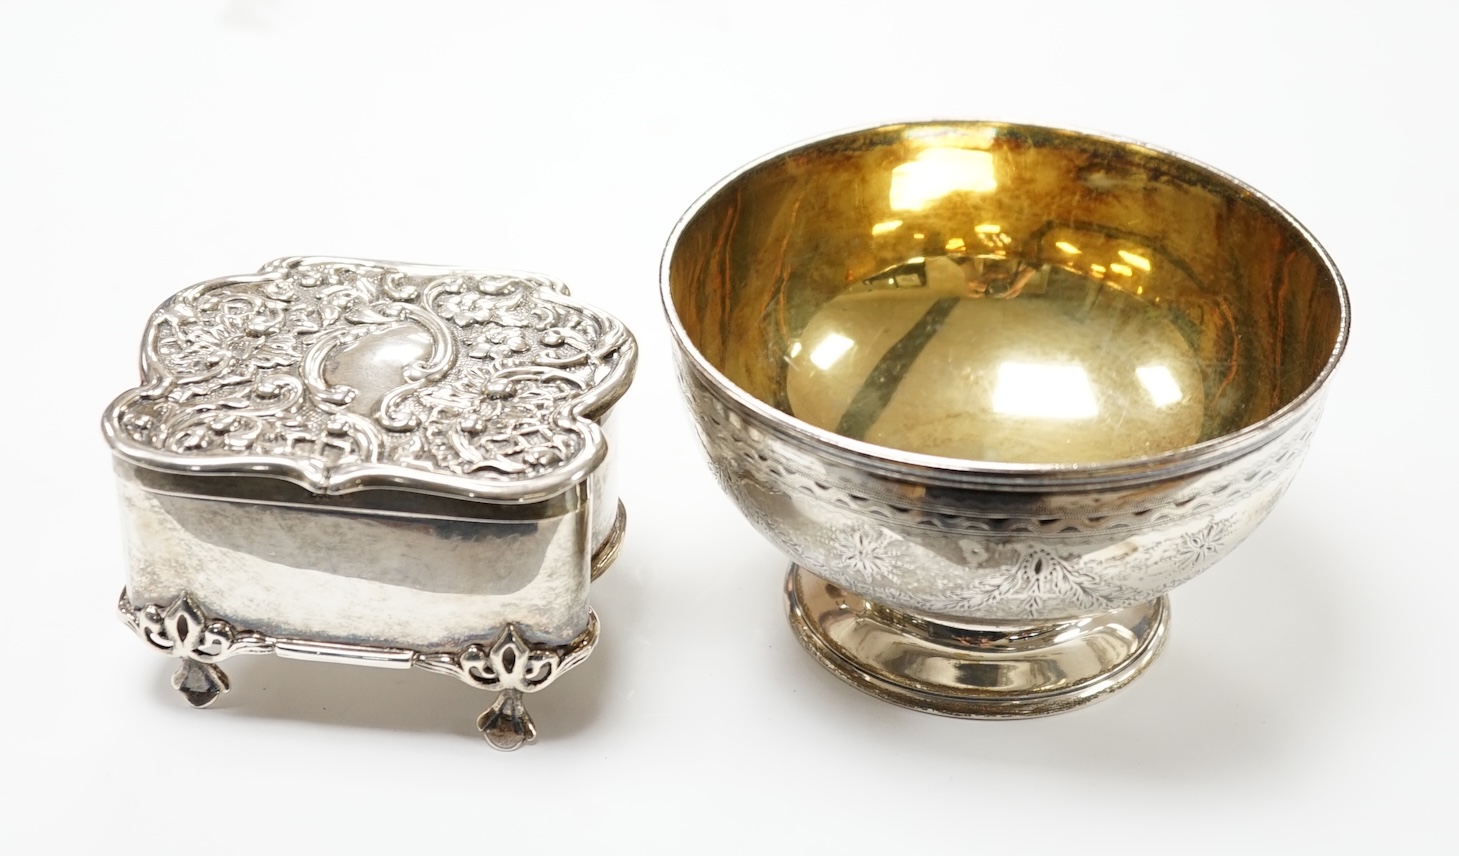 A Victorian silver sugar bowl, Robert Harper, London, 1870, diameter 11.1cm, together with a George V repousse silver trinket box, 8.2oz. Good to fair condition.